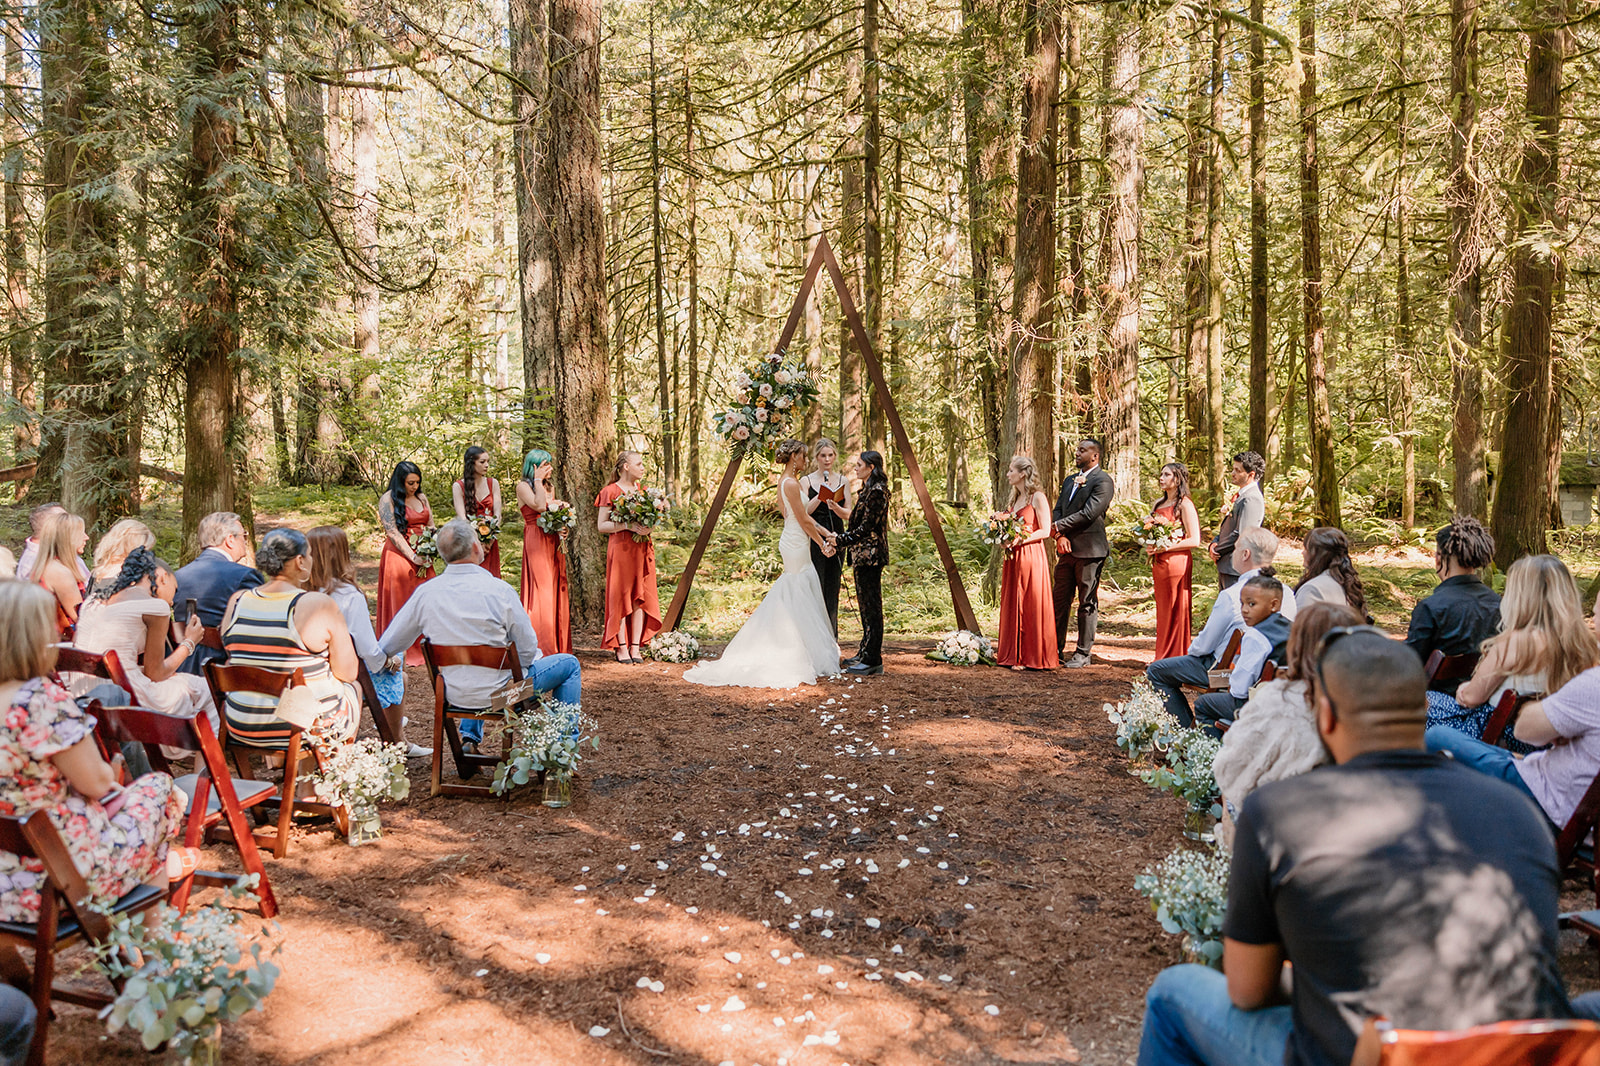 married couple during their ceremony in a forest Camp Colton - A Mystical Oregon Wedding Venue